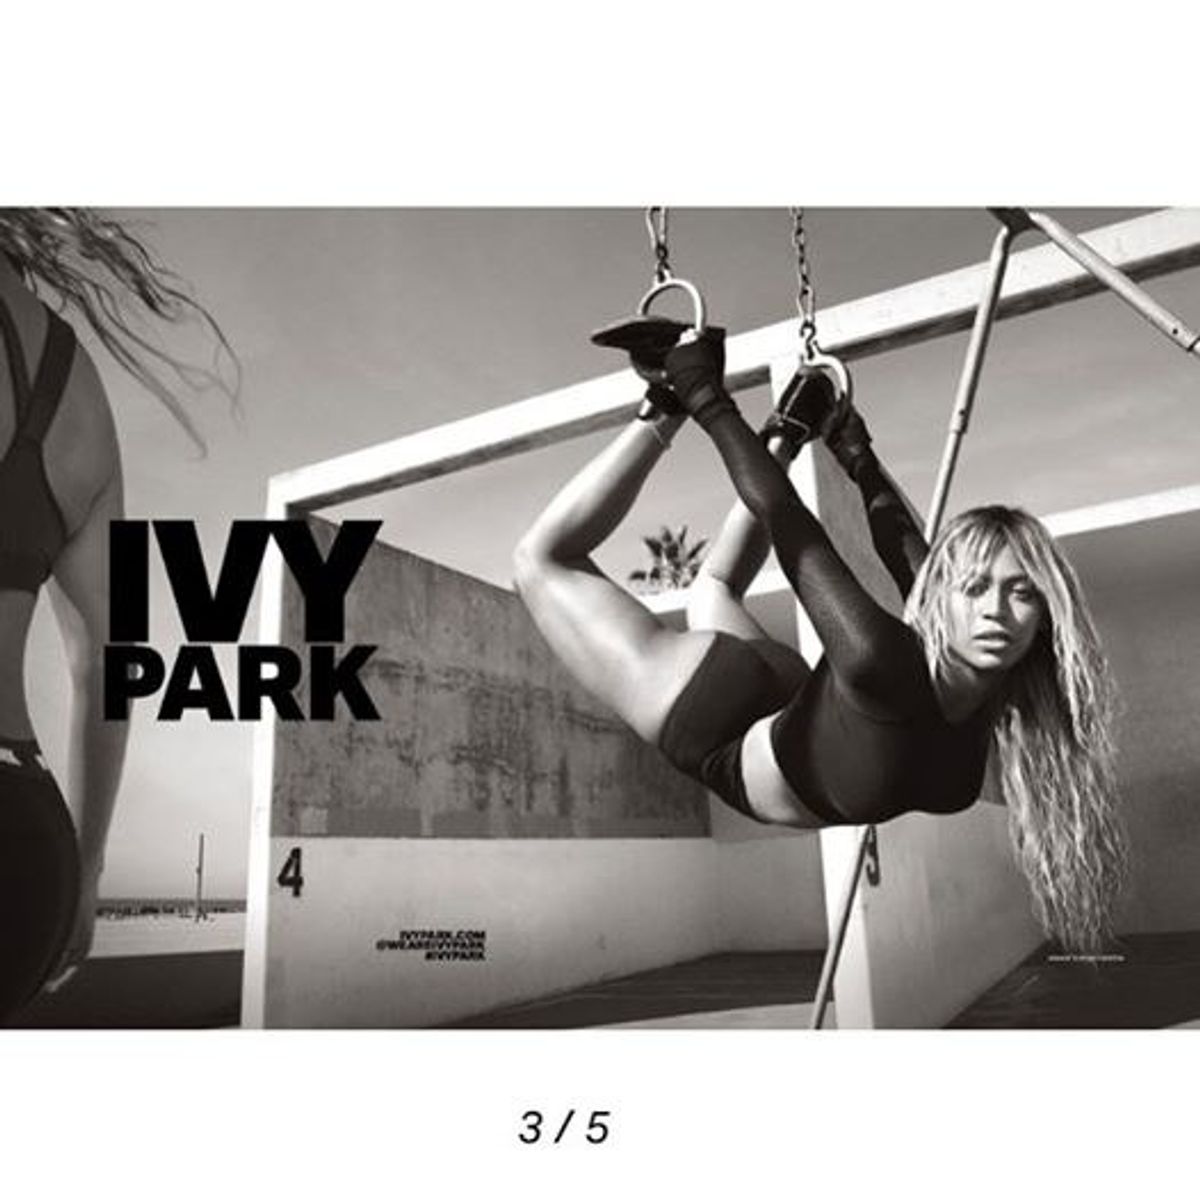 Beyoncé Is Back At It Again With A Fitness Clothing Line: Ivy Park